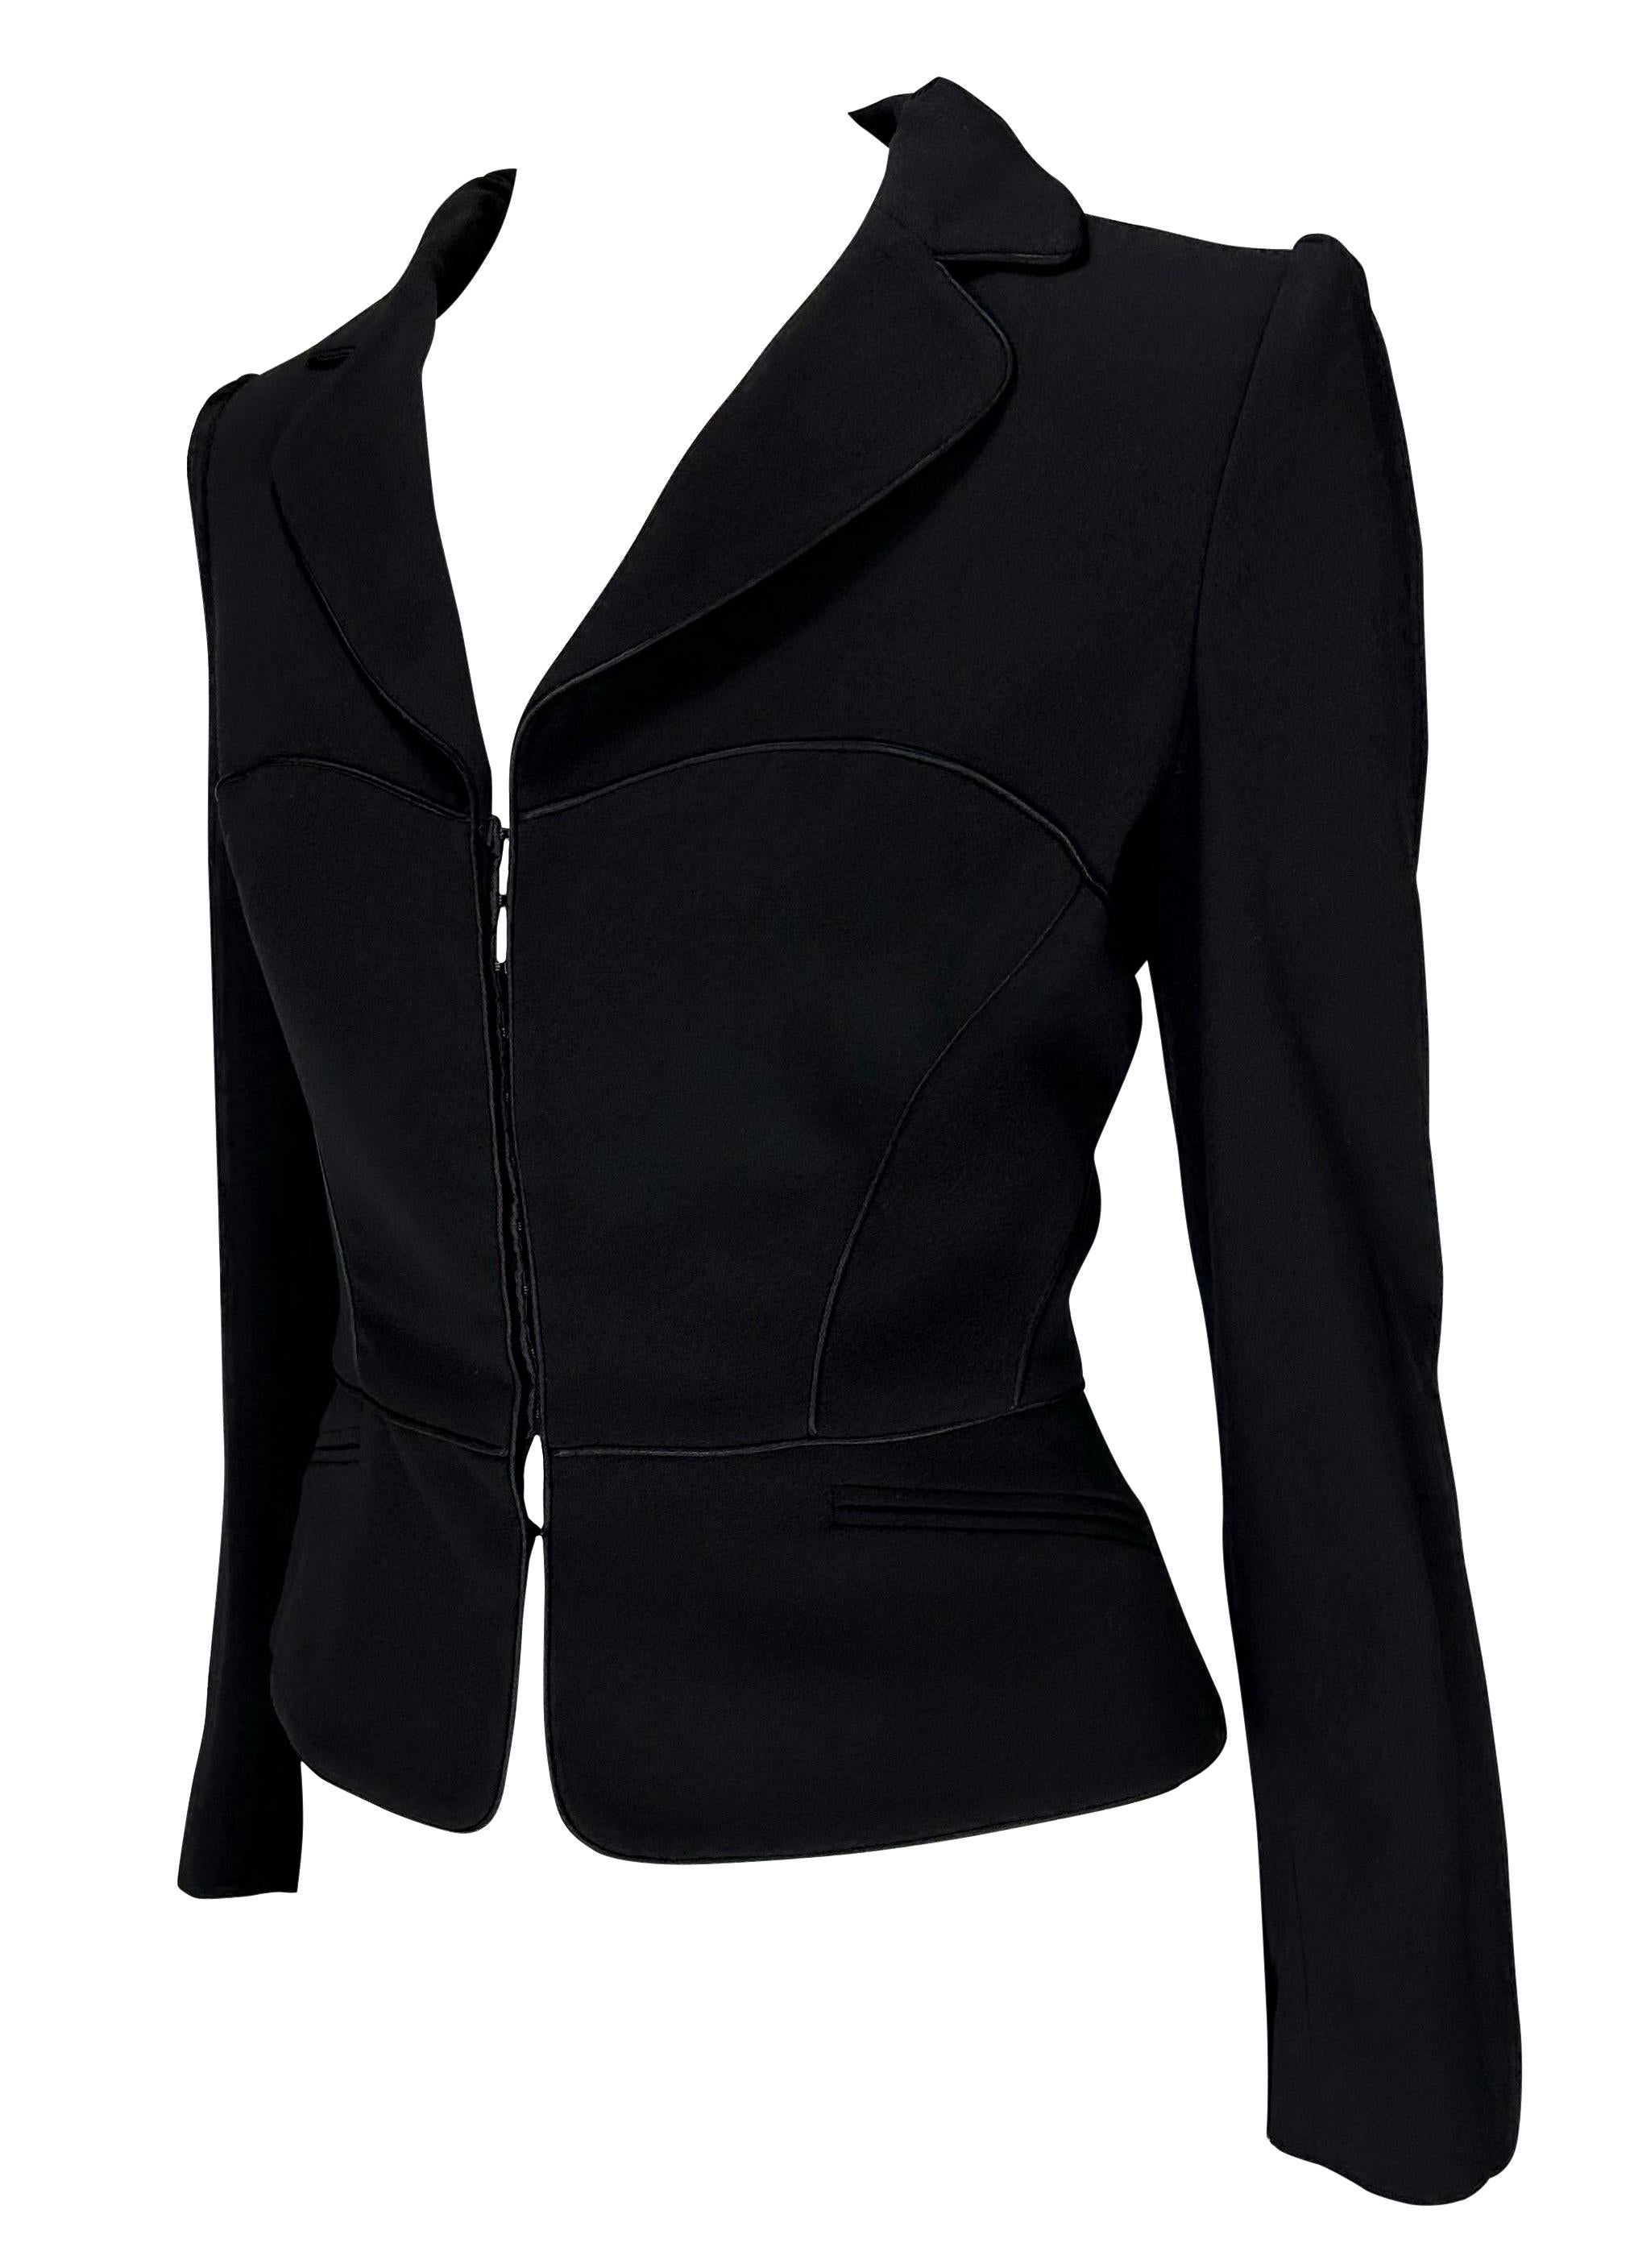 2000s Emanuel Ungaro Corset Lace-Up Black Cinched Blazer Jacket In Good Condition For Sale In West Hollywood, CA